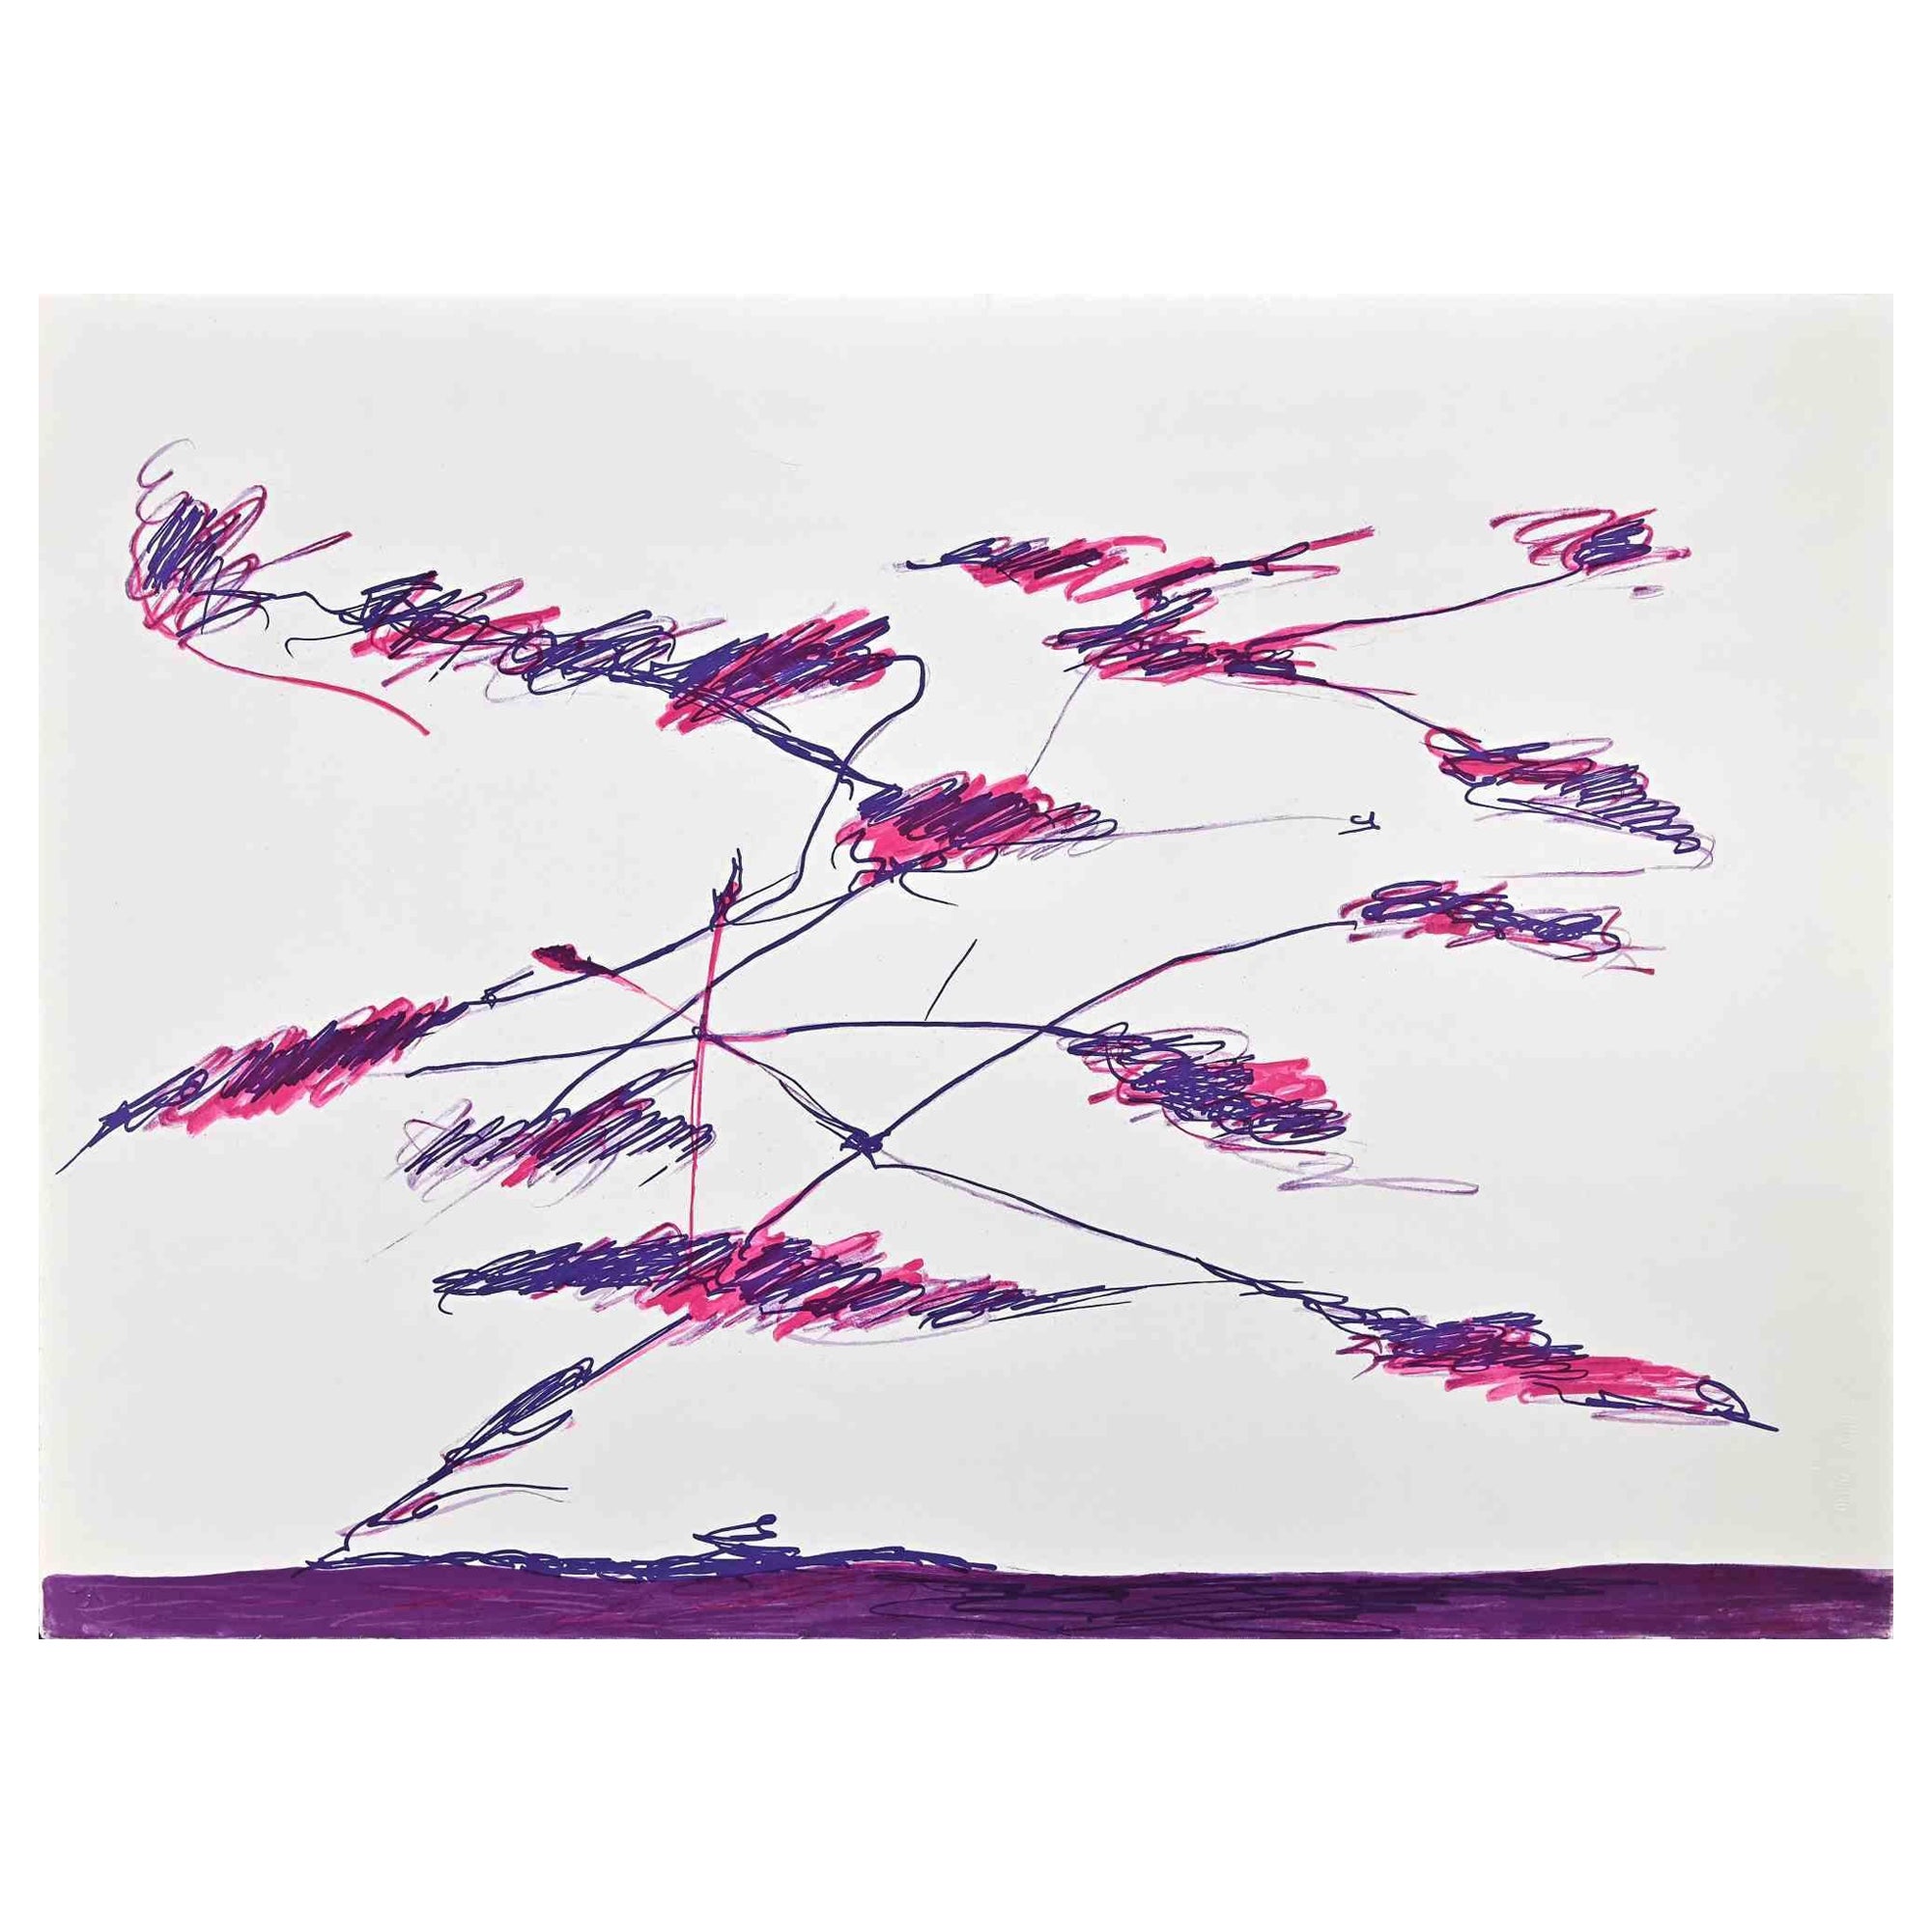 Abstract Violet Composition is a colored screen print realized by the contemporary artist Giulio Turcato in 1973.

Hand-signed in pencil on the lower right.

Numbered on the lower left margin, edition, 37/100.

Authenticity label of La Nuova Foglio